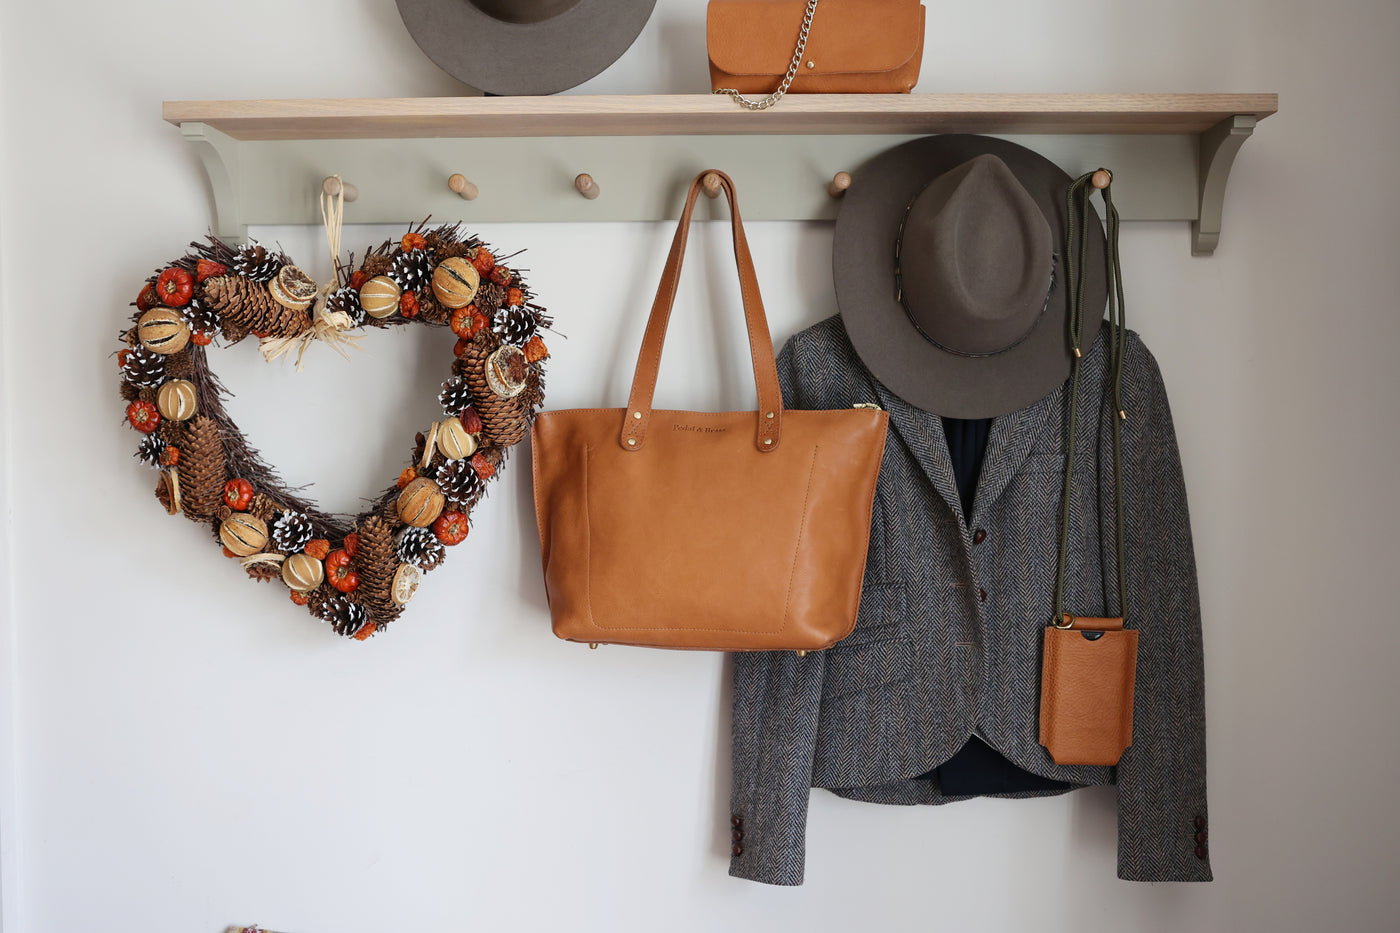 Tan leather bags and accessories